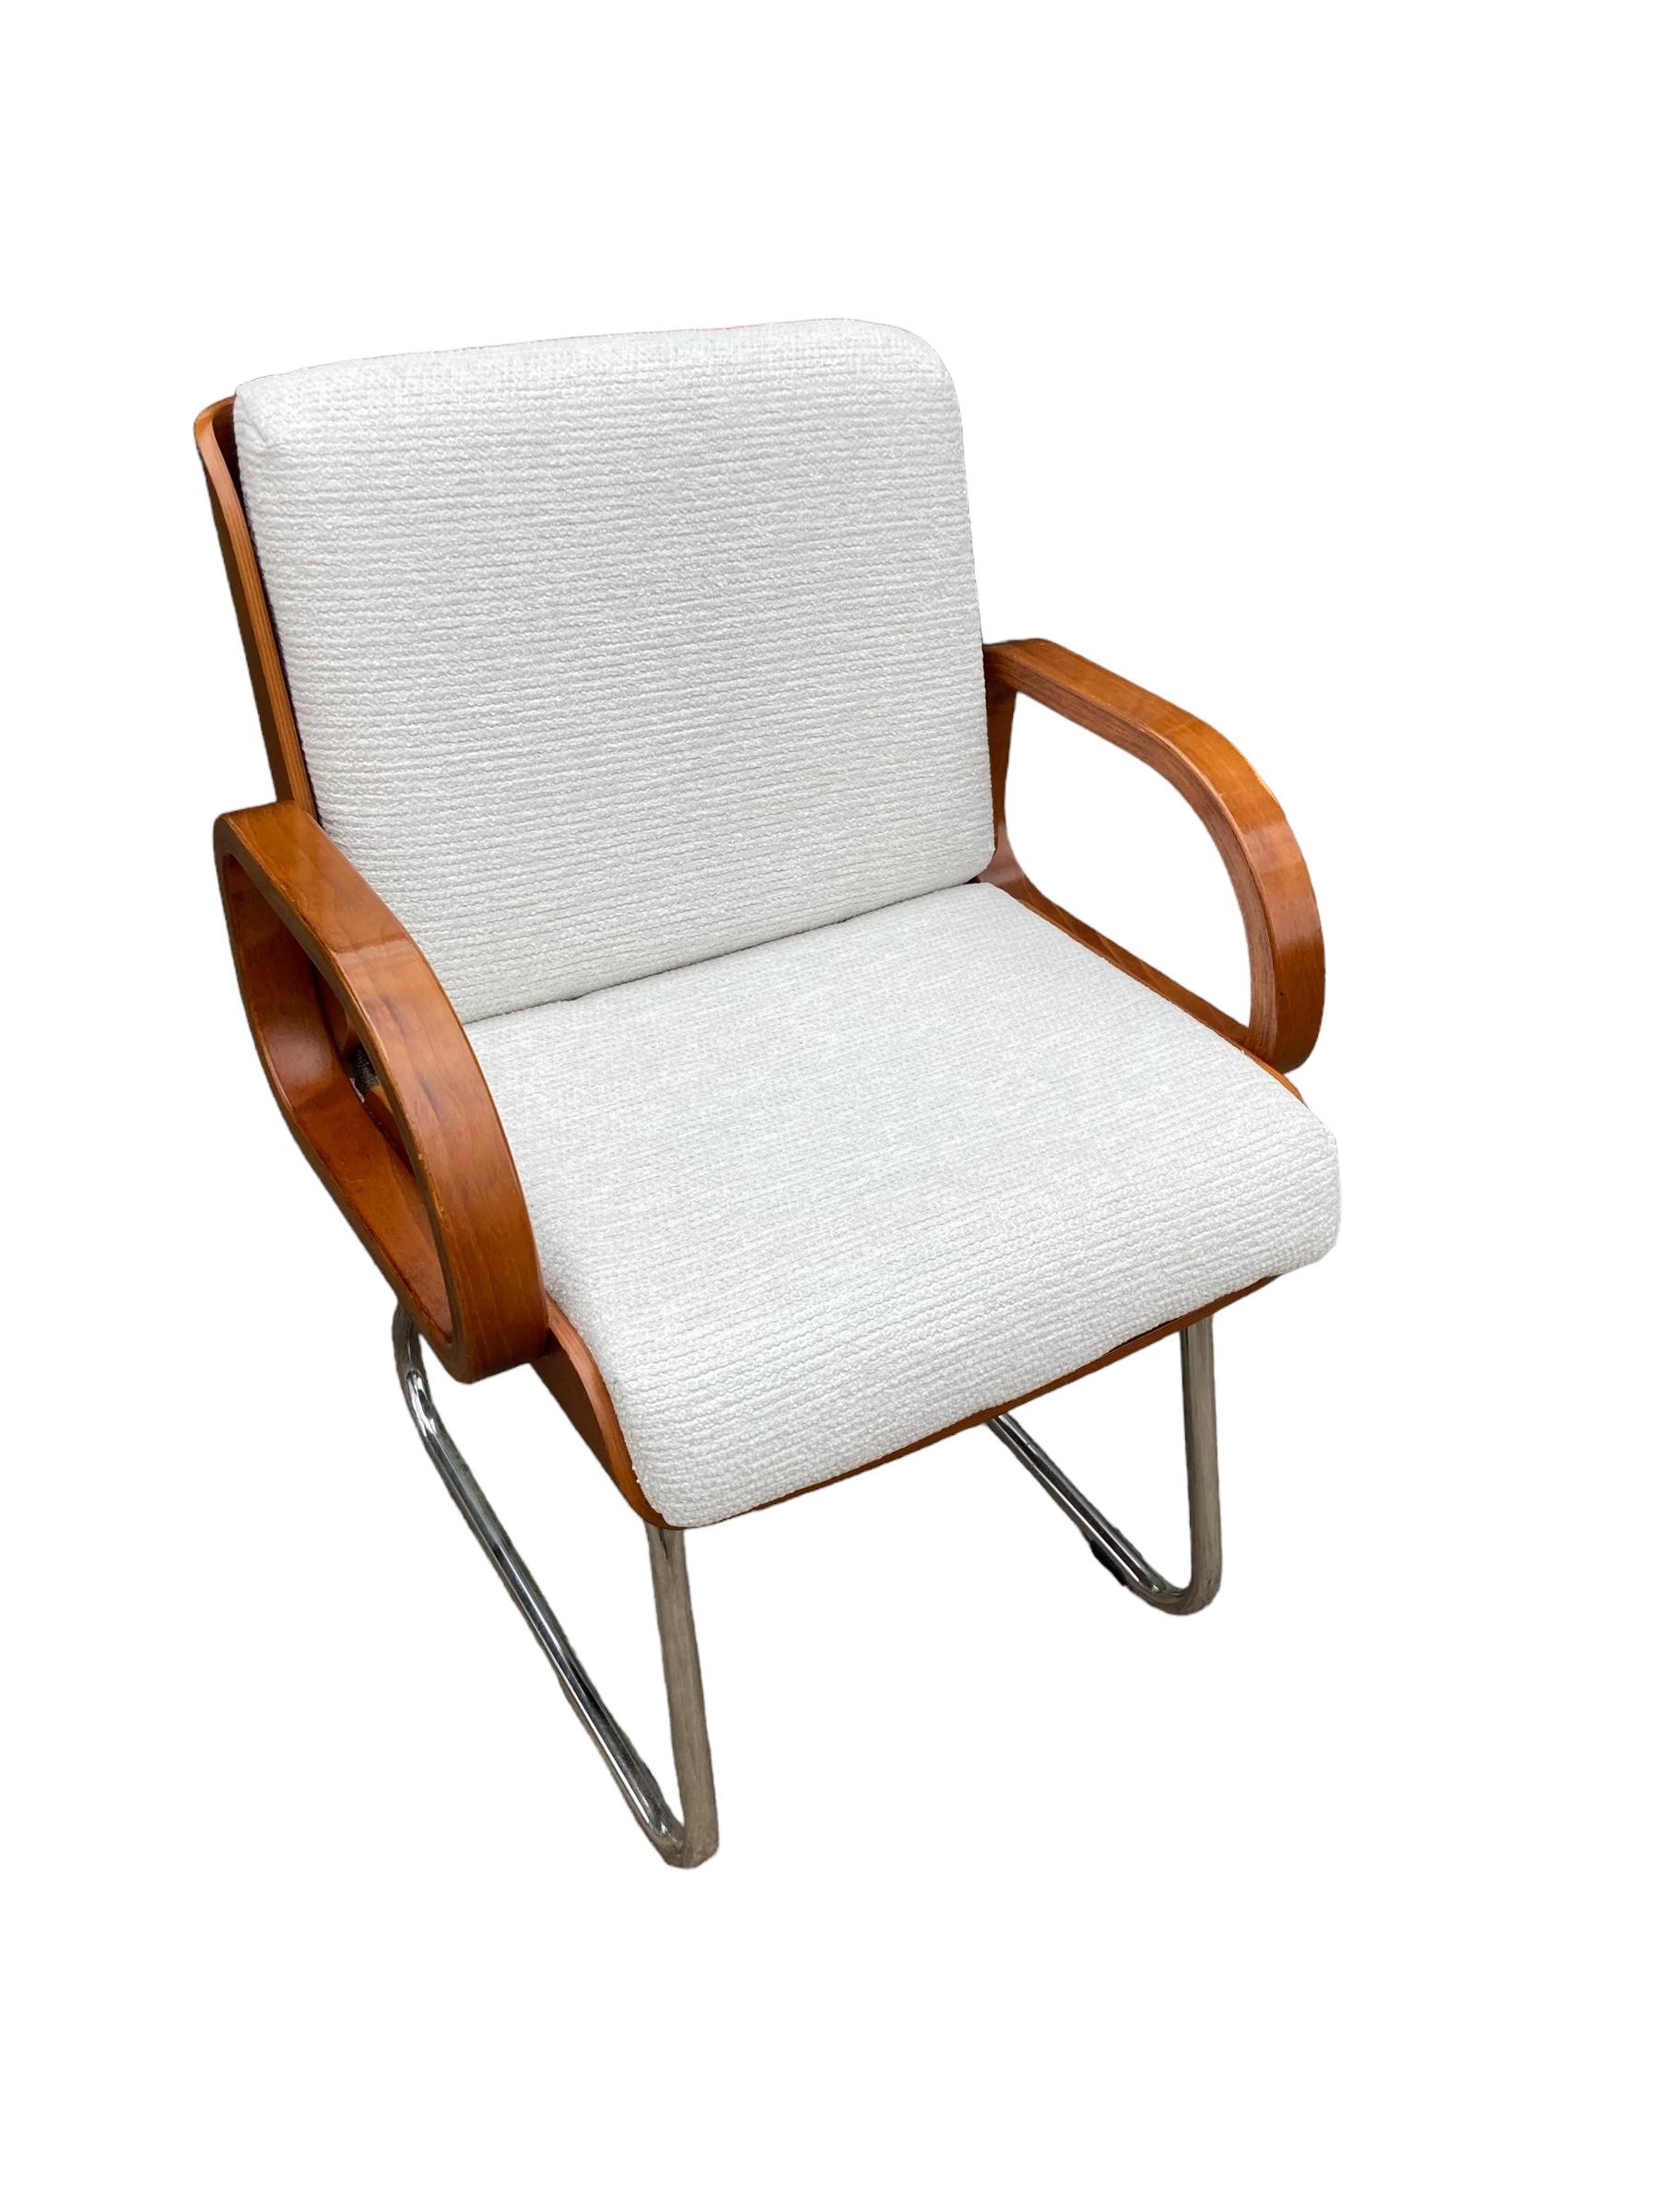 Gordon Russell Mid Century Bauhaus Style Teak and Chrome Office chair For Sale 1